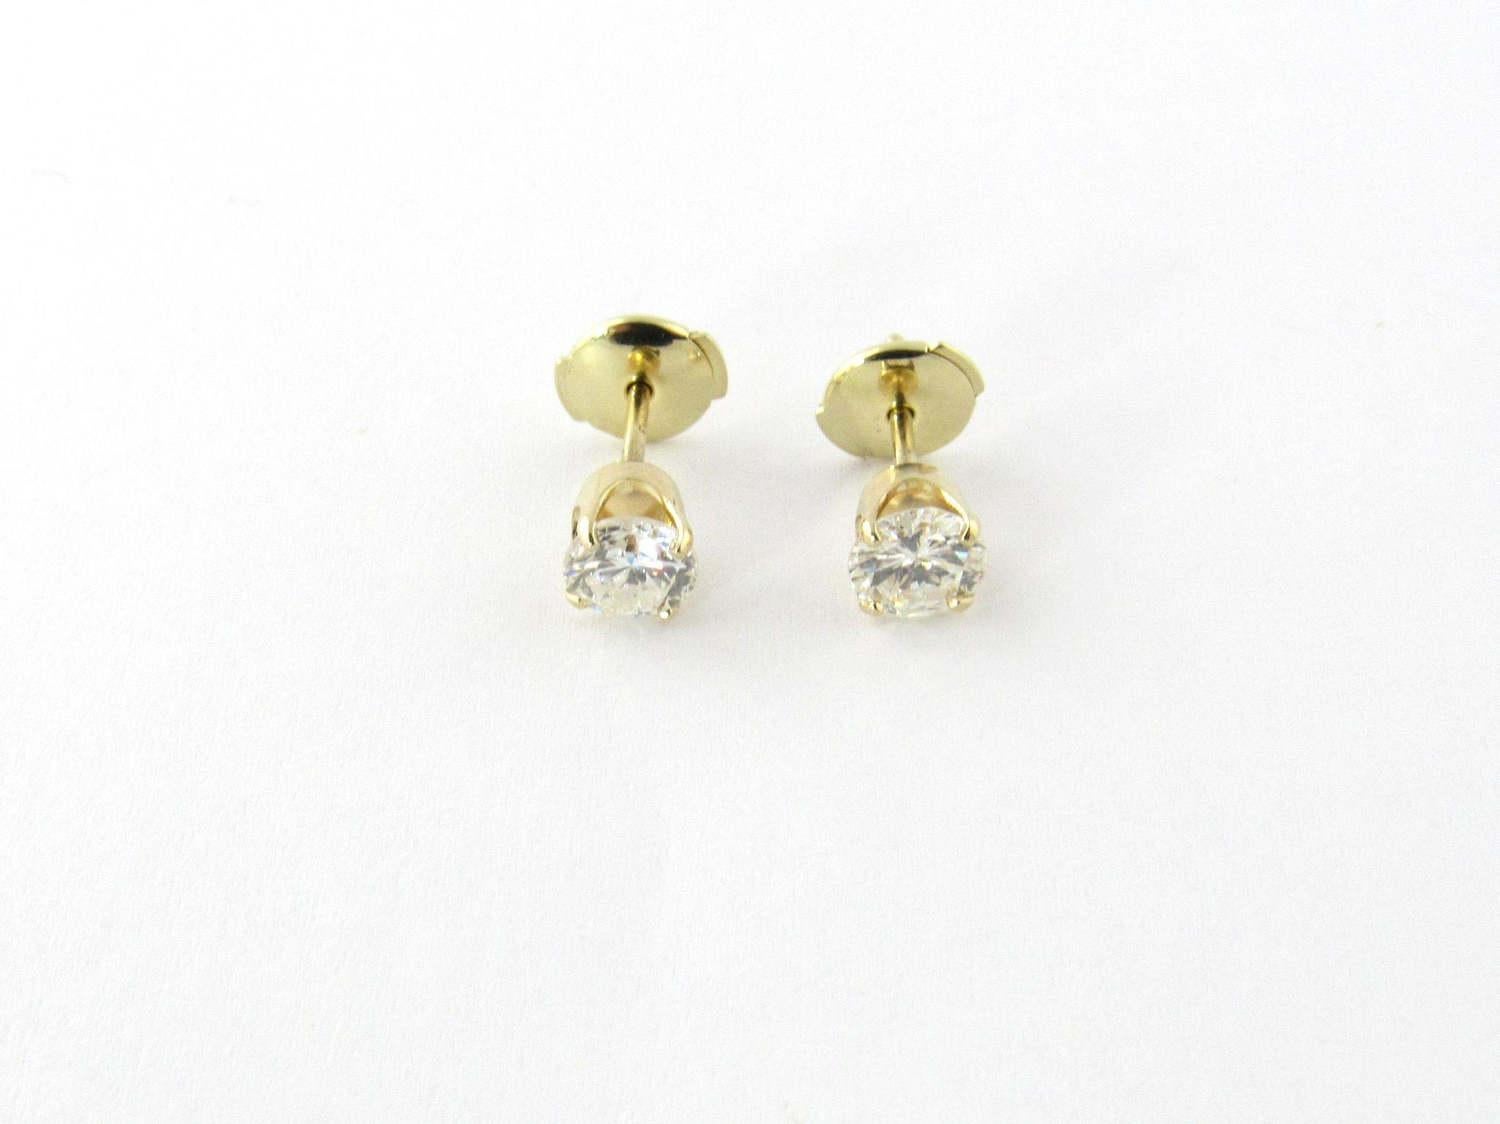 Vintage 14K yellow gold diamond stud earrings. 

Flat disk push backs on 4 prong wire base posts. 

Round brilliant diamonds approx. .95ct twt. H color. SI2 clarity. 

14mm long. 6mm at prongs. 7mm disk diameter backs. 

Total weight: 1.2g, .7dwt